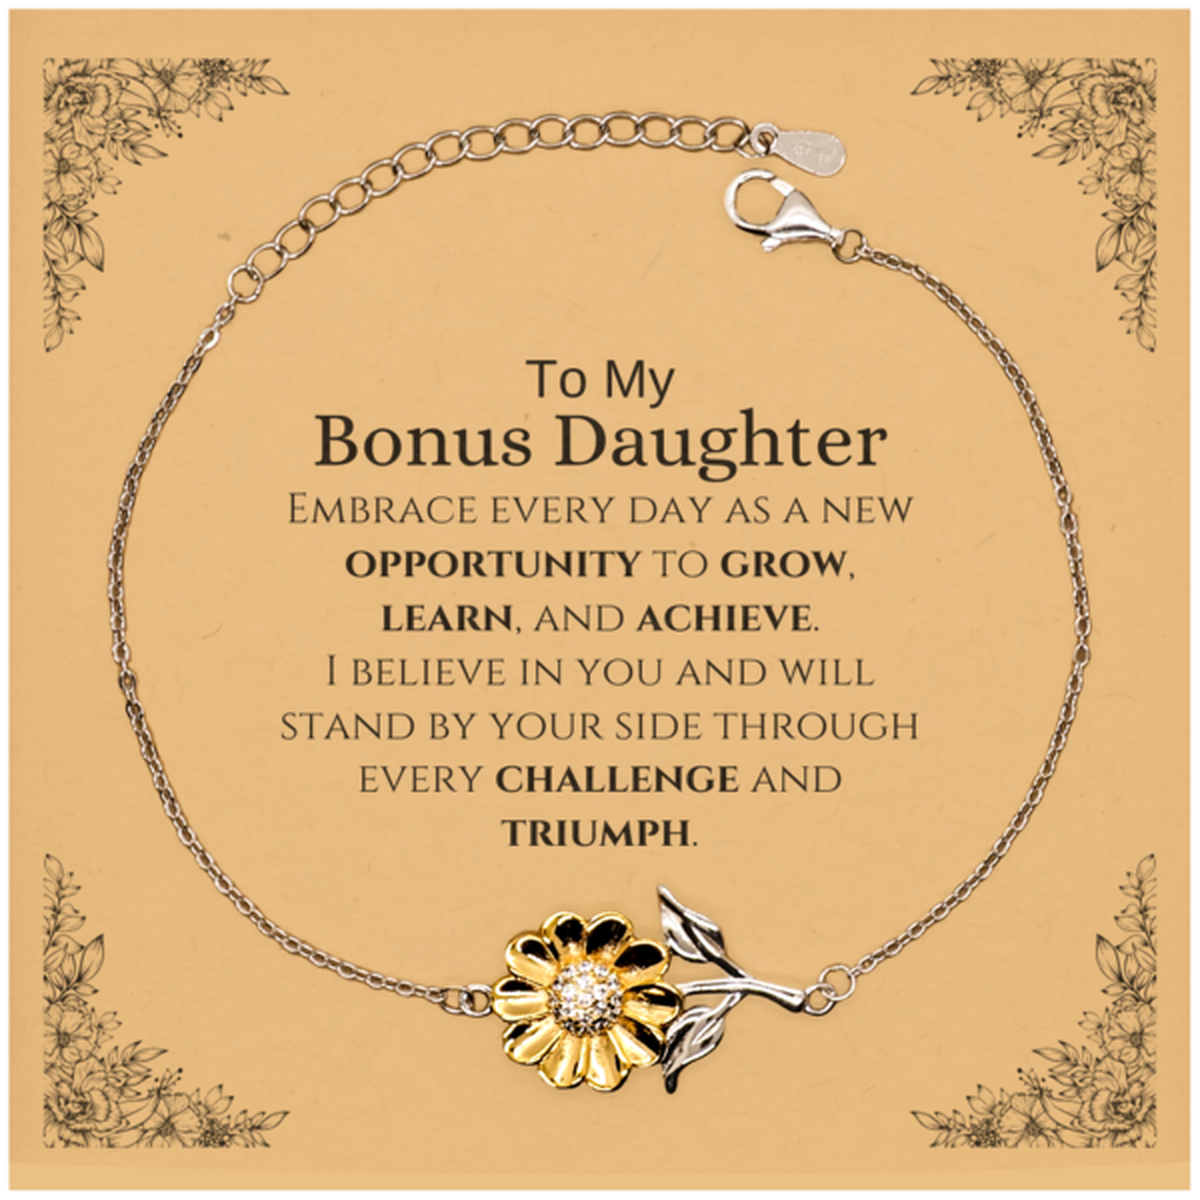 To My Bonus Daughter Gifts, I believe in you and will stand by your side, Inspirational Sunflower Bracelet For Bonus Daughter, Birthday Christmas Motivational Bonus Daughter Gifts